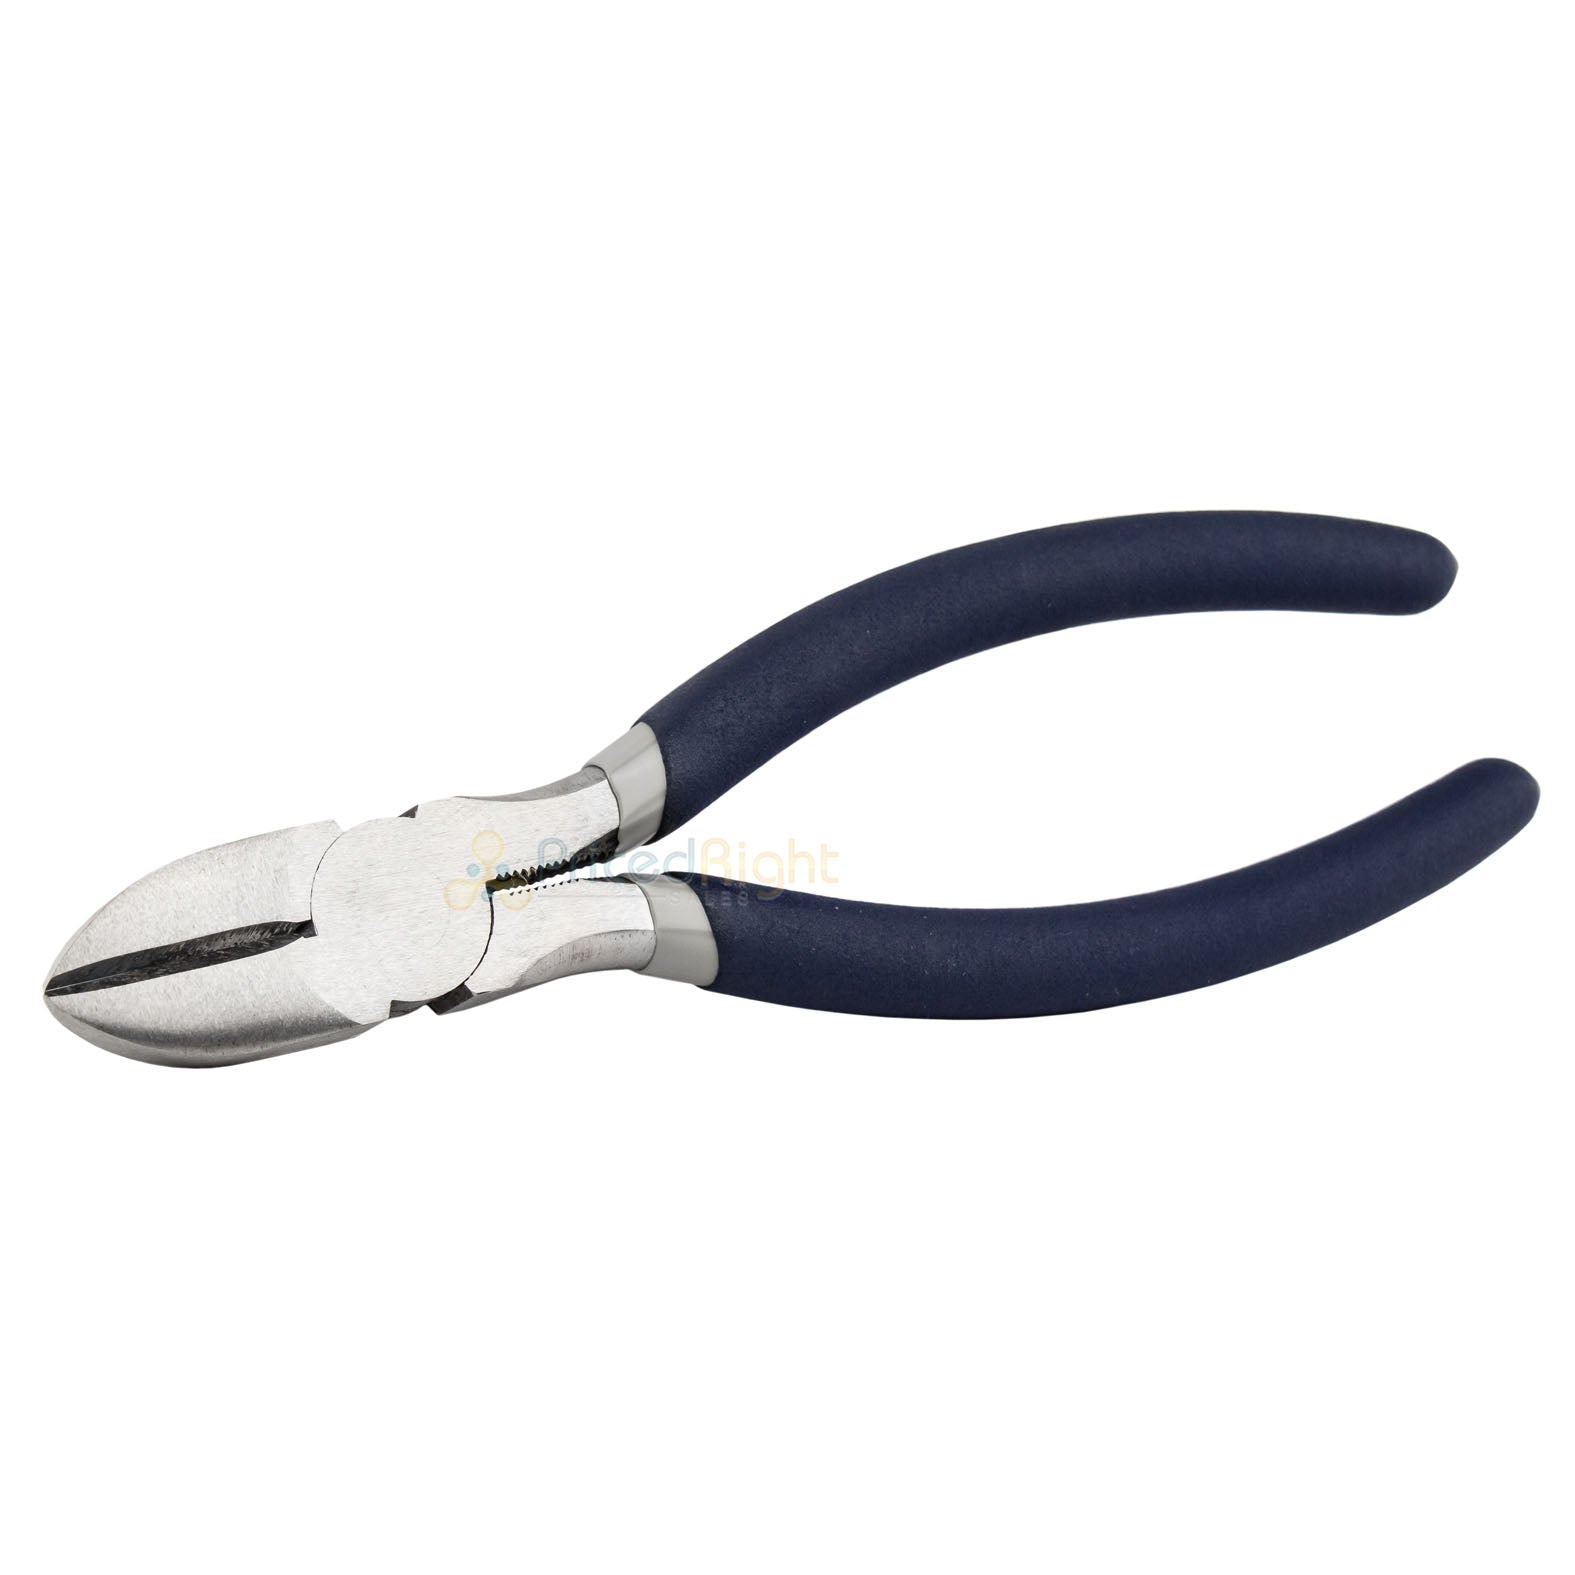 7" Diagonal Cutting Pliers High Leverage Wire Side Cutter Nippers Allied 80108